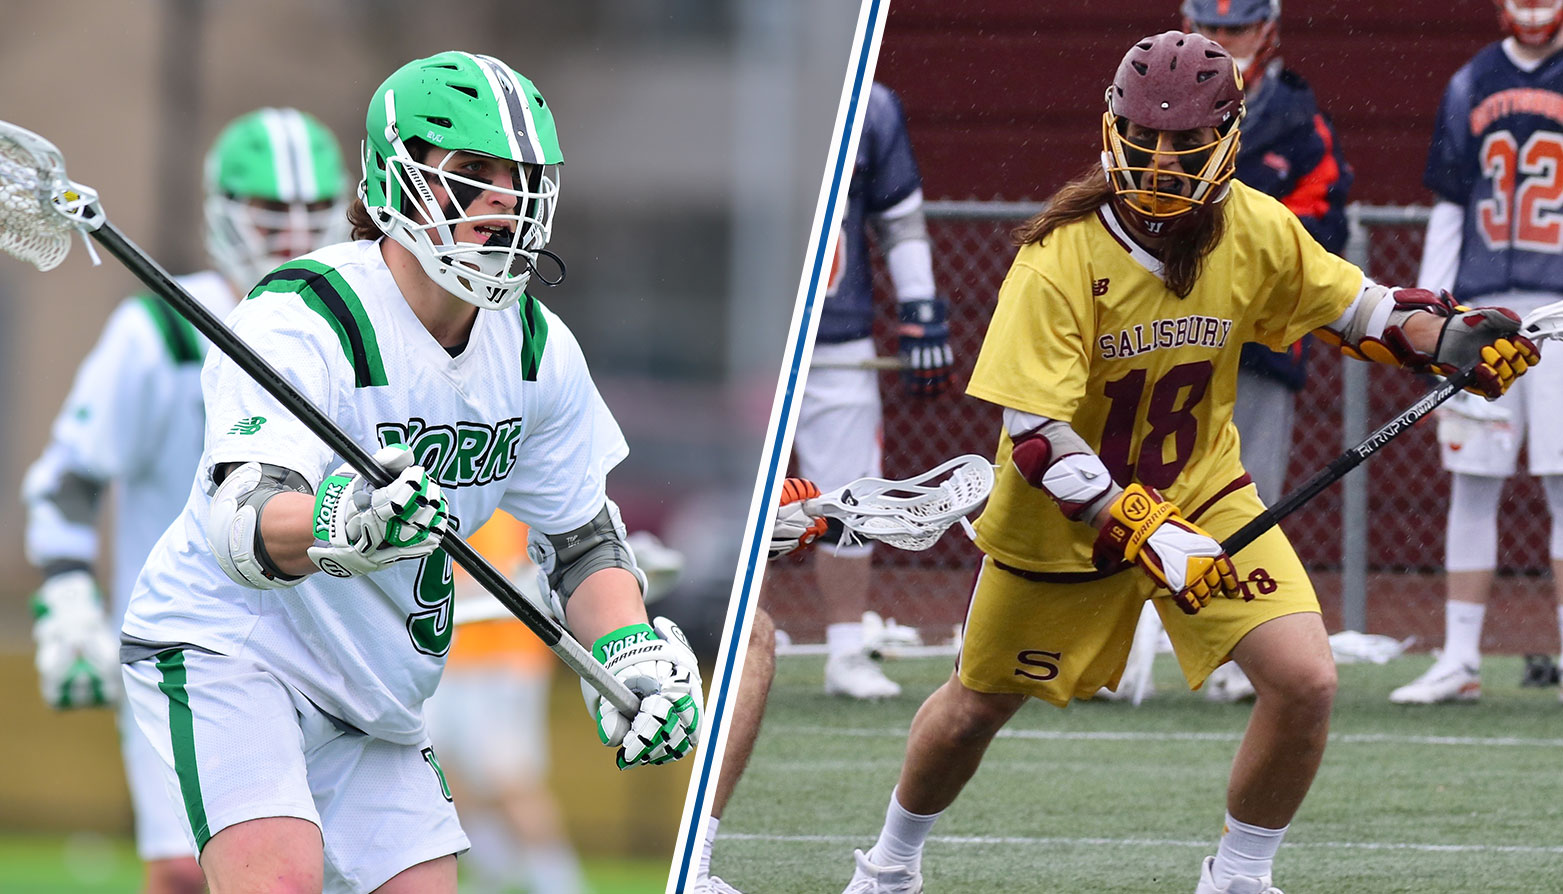 Salisbury's Gwin & York's Witchey Collect Major USILA Honors; 11 from CAC Earn All-America Honors